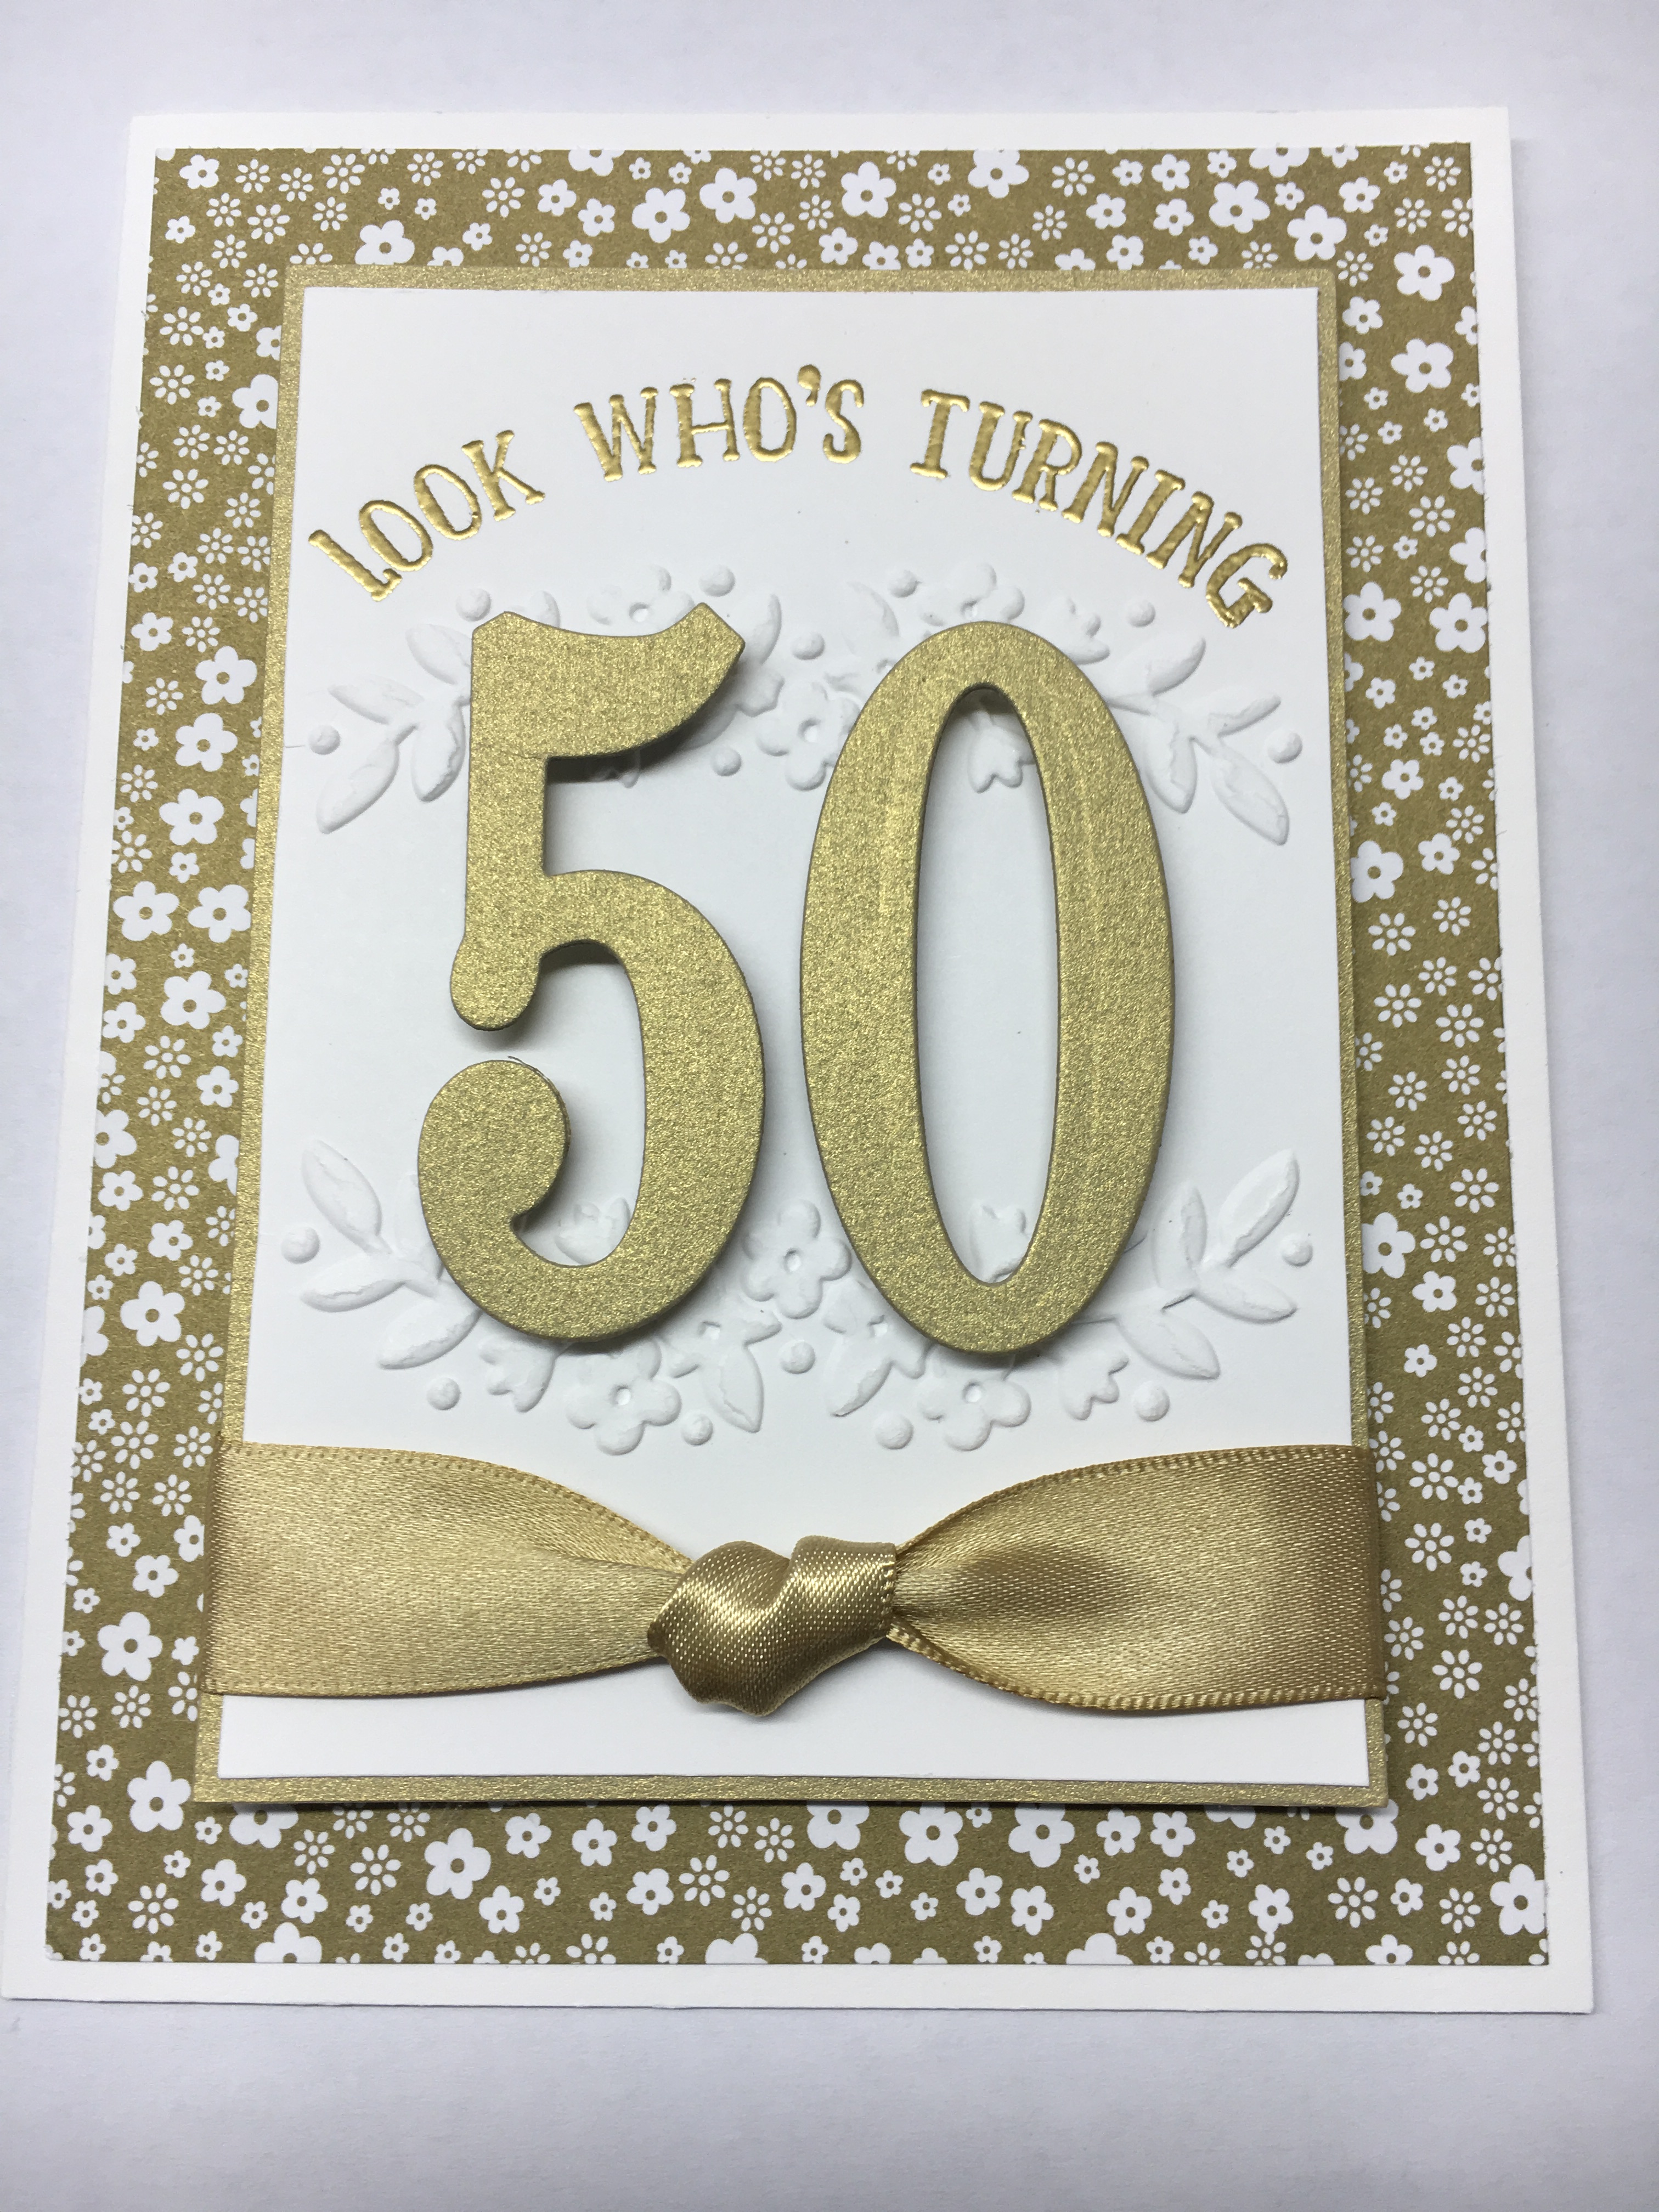 Stampin Up Number of Years 50th birthday card idea - Jeanie Stark StampinUp